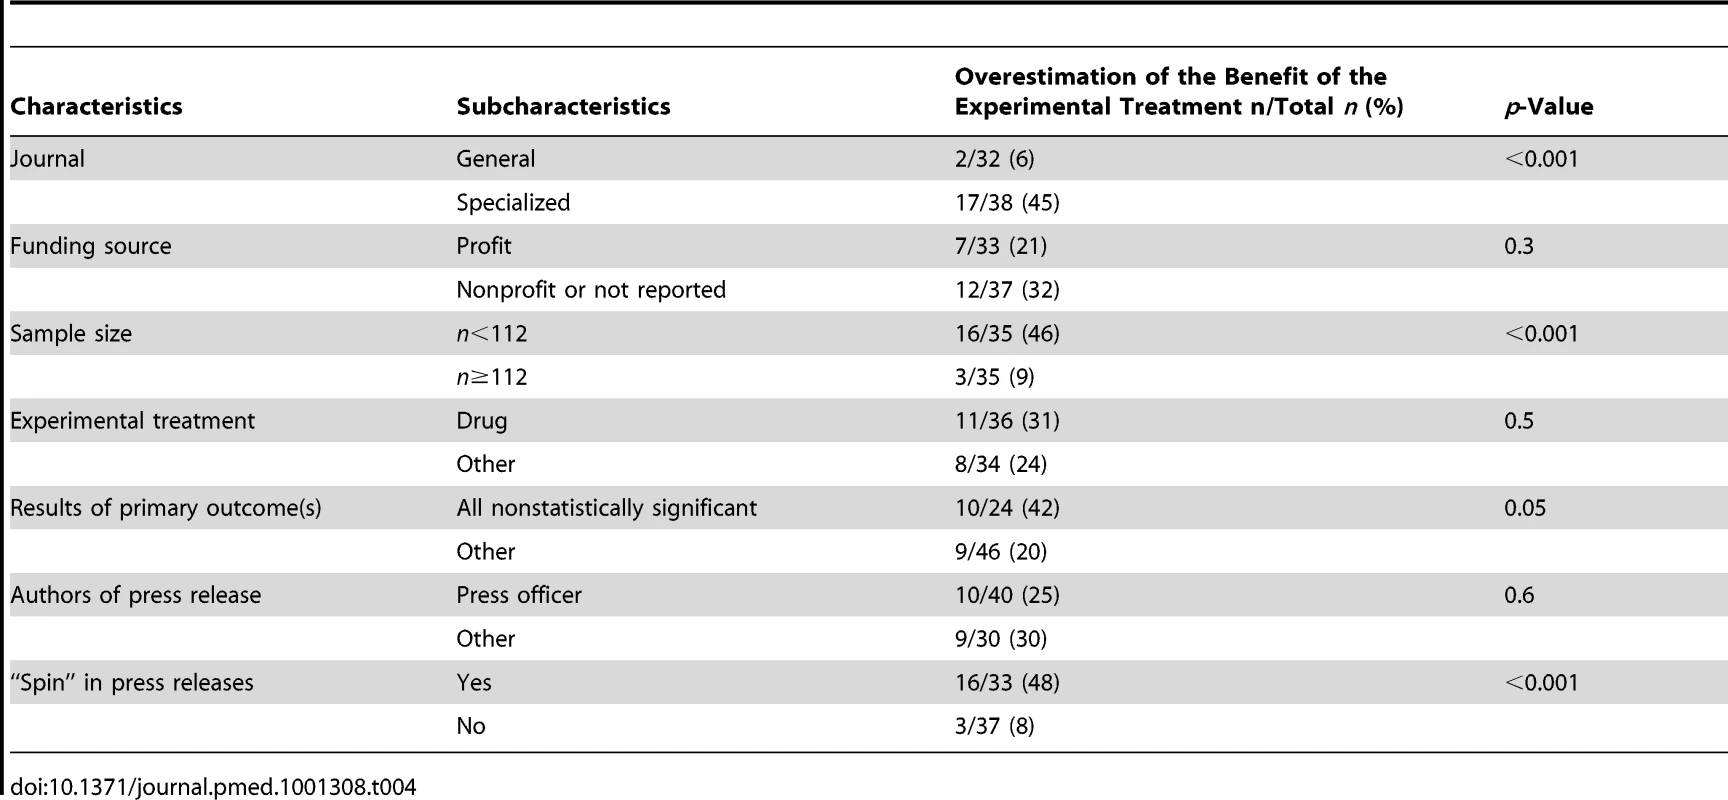 Bivariate analysis of factors associated with an overestimation of the benefit of the experimental treatment from the press releases as compared with the interpretation from articles.